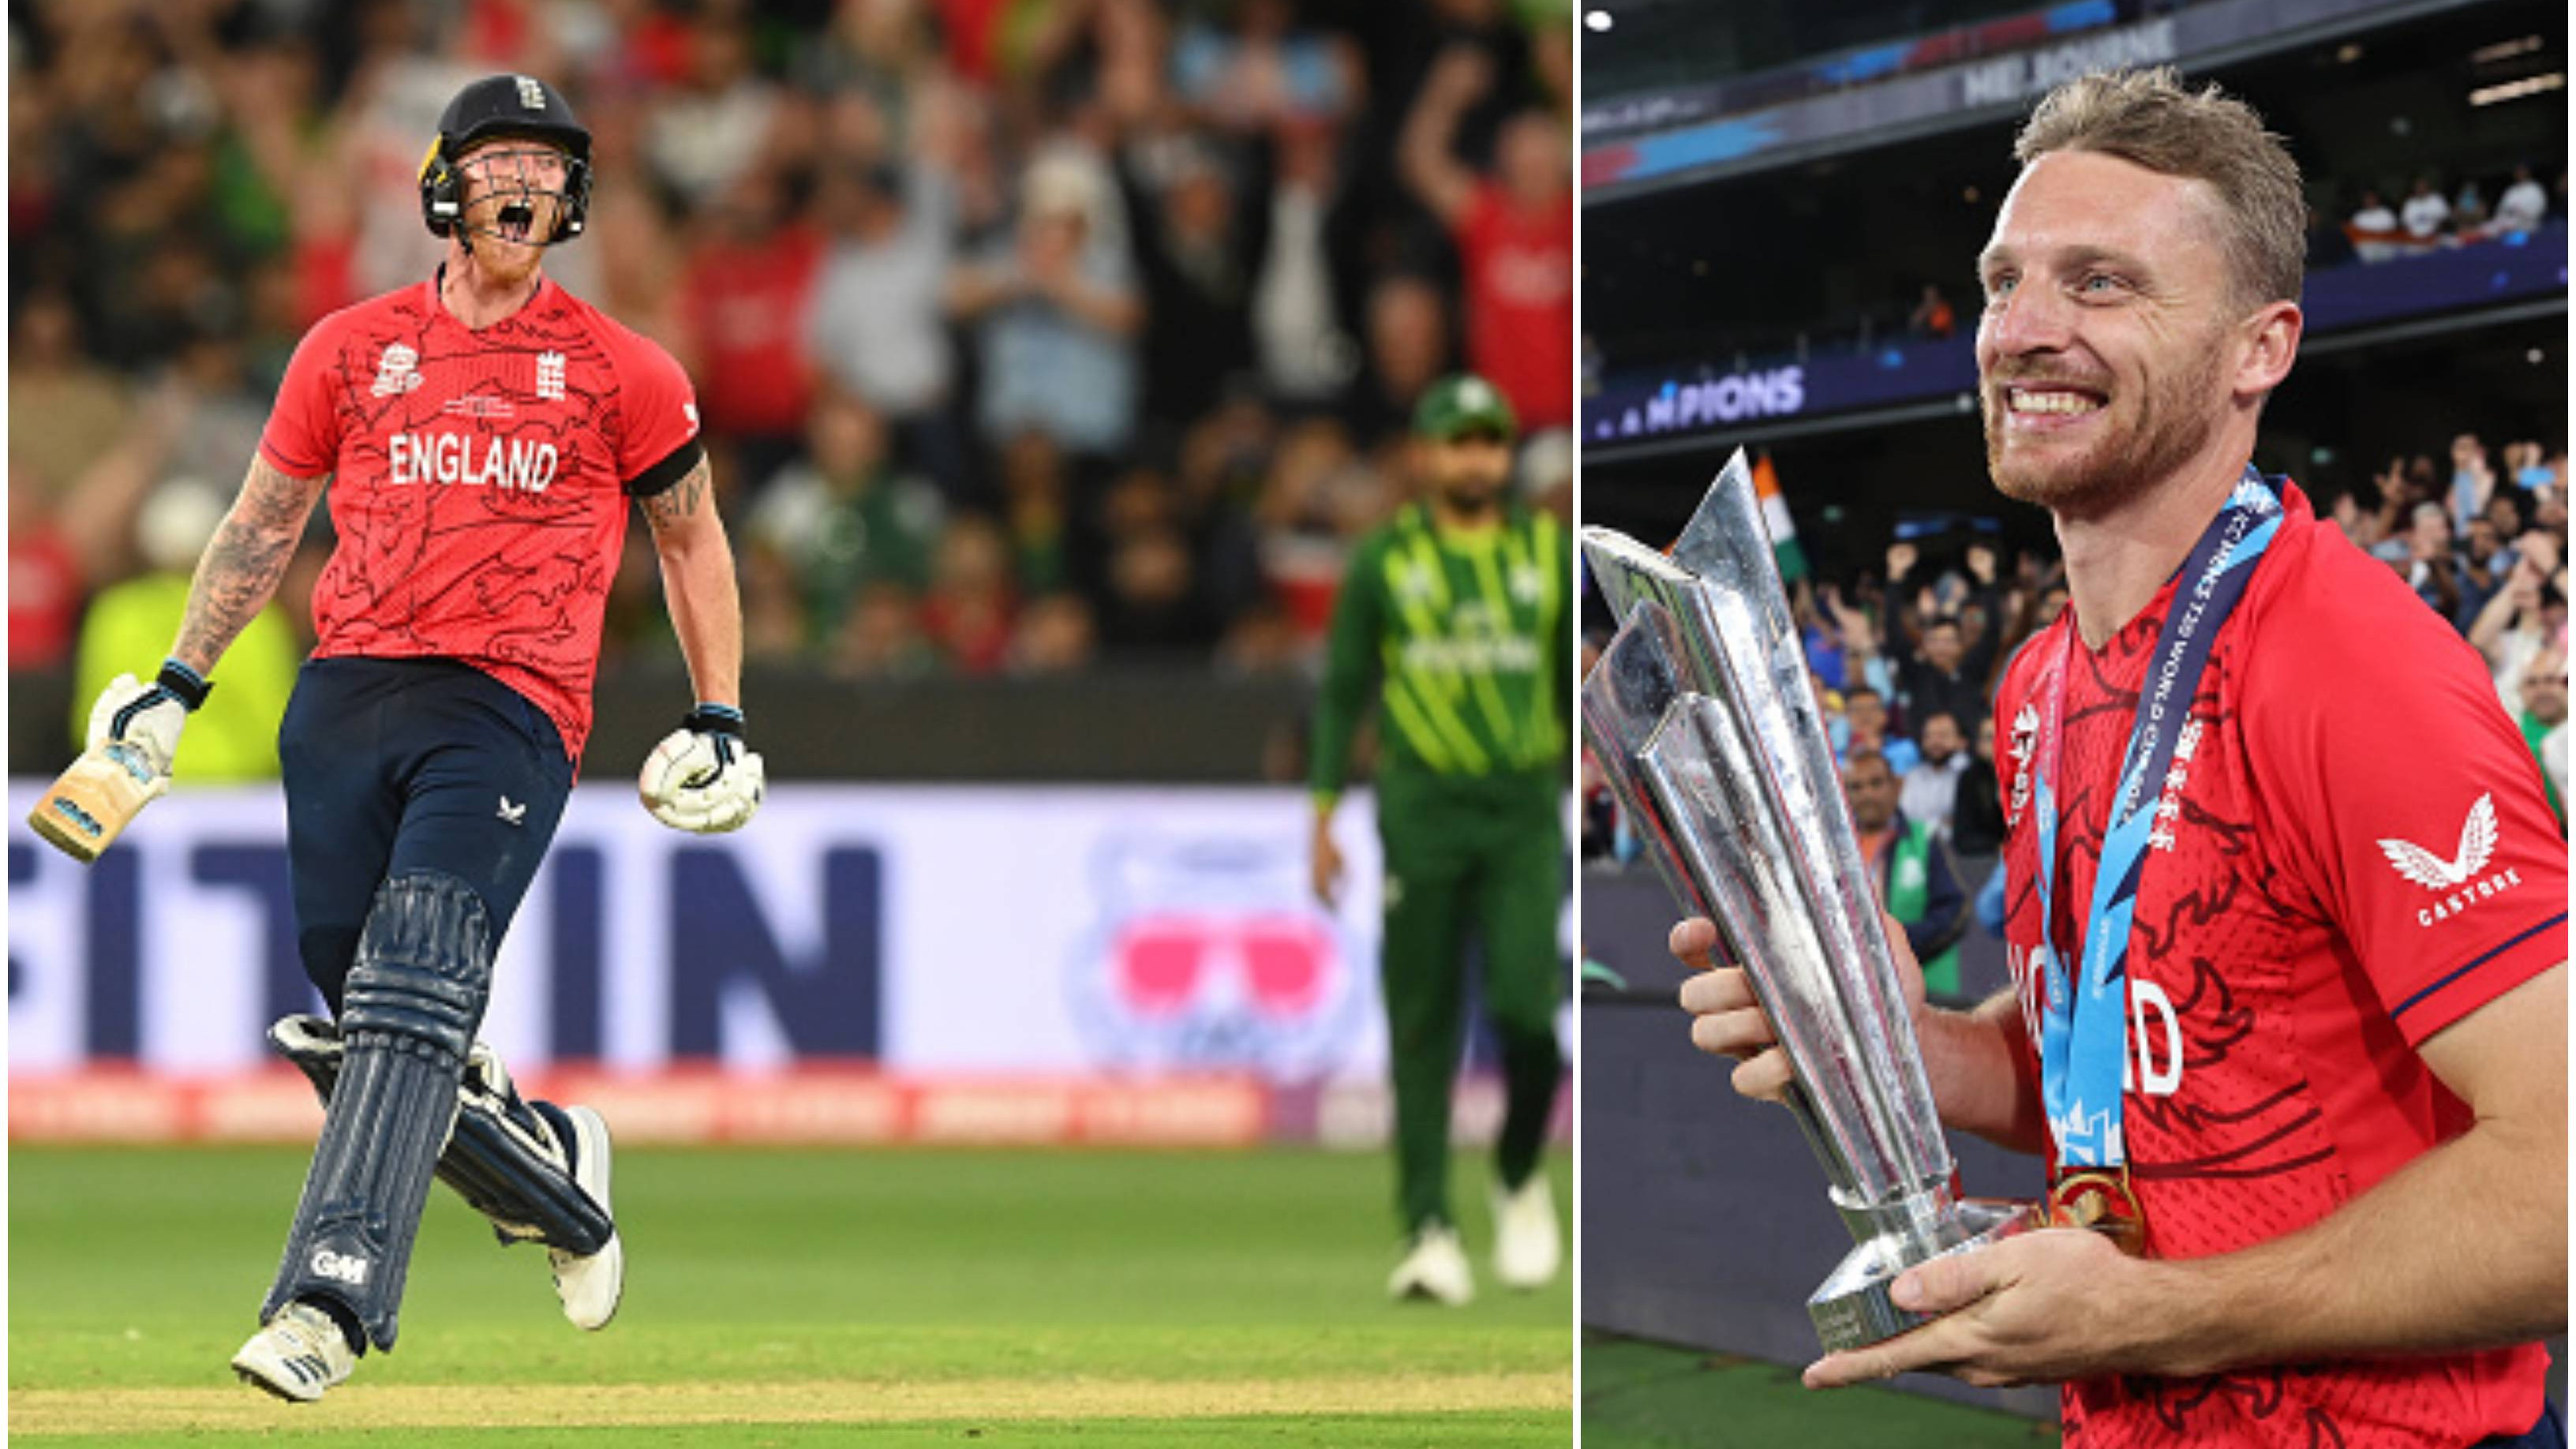 T20 World Cup 2022: “He is the ultimate competitor in anything he does,” Buttler hails Stokes after title win